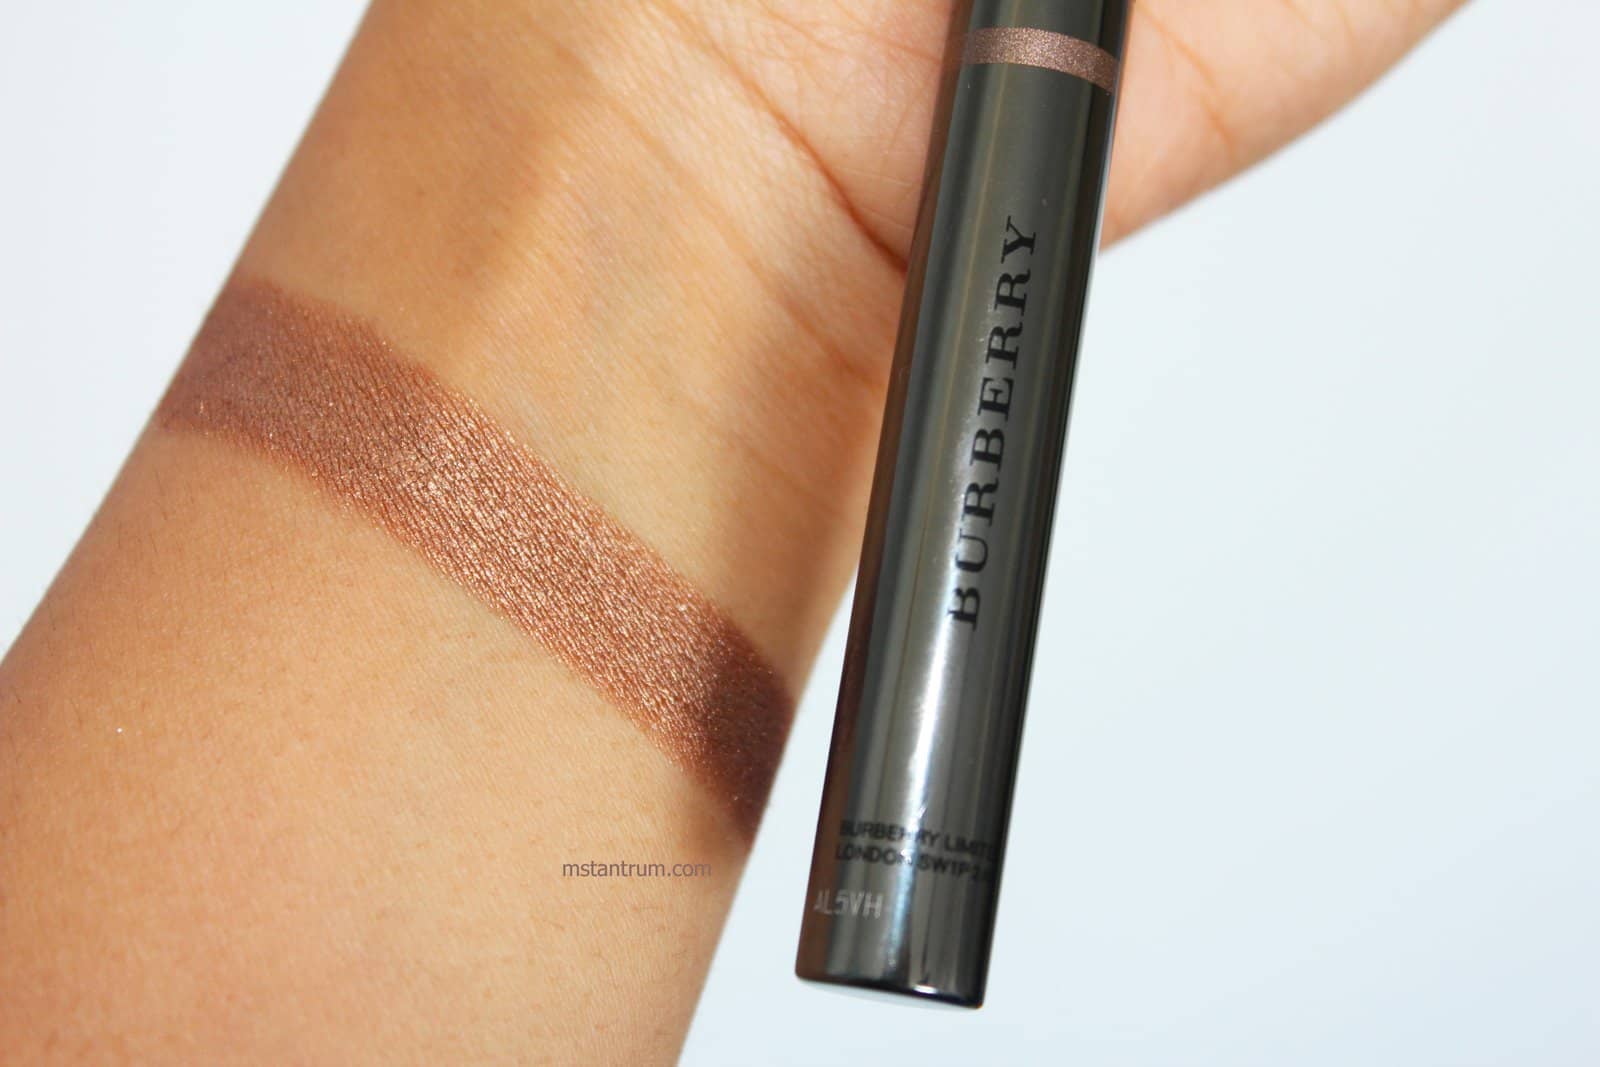 burberry pale copper eyeshadow stick swatch with Flash